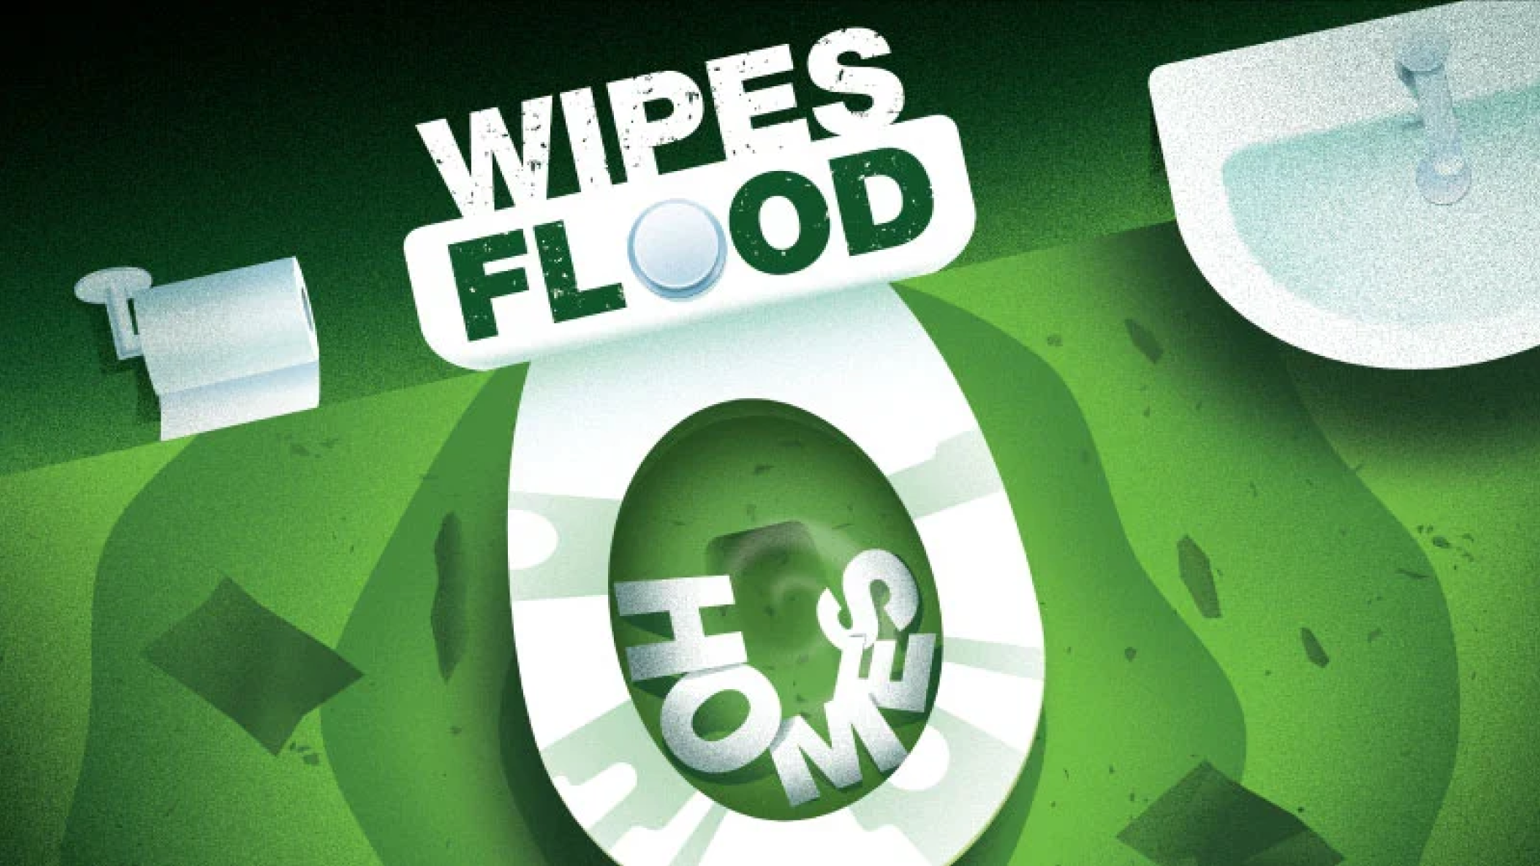 A poster of a flooded toilet with wipes illustrates that wipes would clog pipes